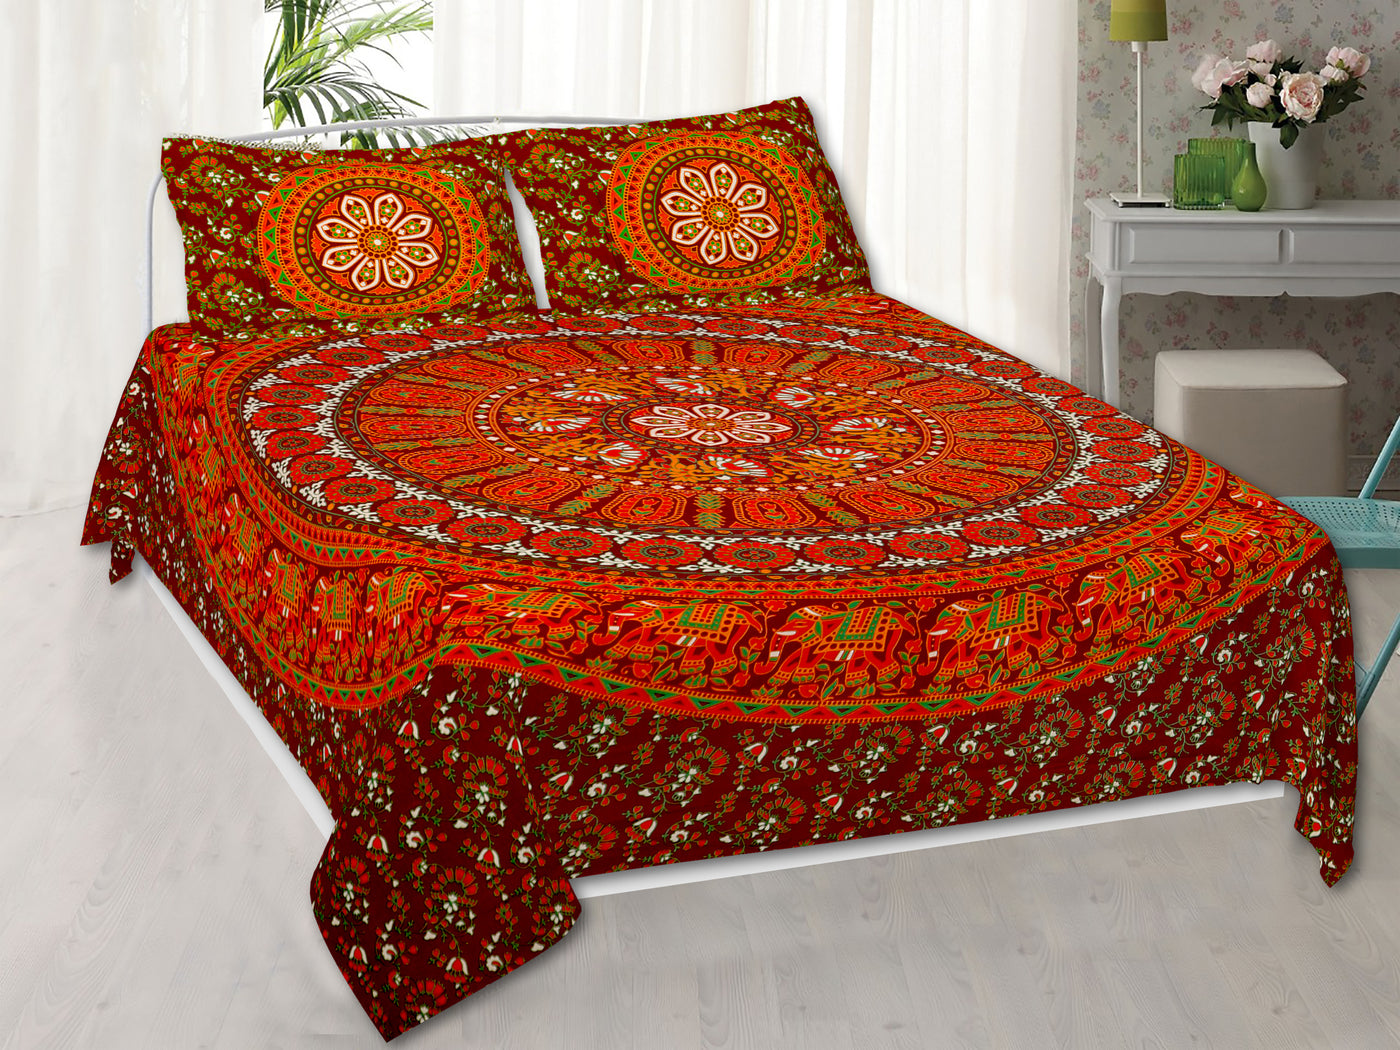 Wanderlust Premium | Full Size 90 x 108 in | 100% Pure Cotton | Double Bedsheet with 2 Pillow Covers (Barmeri Designs)